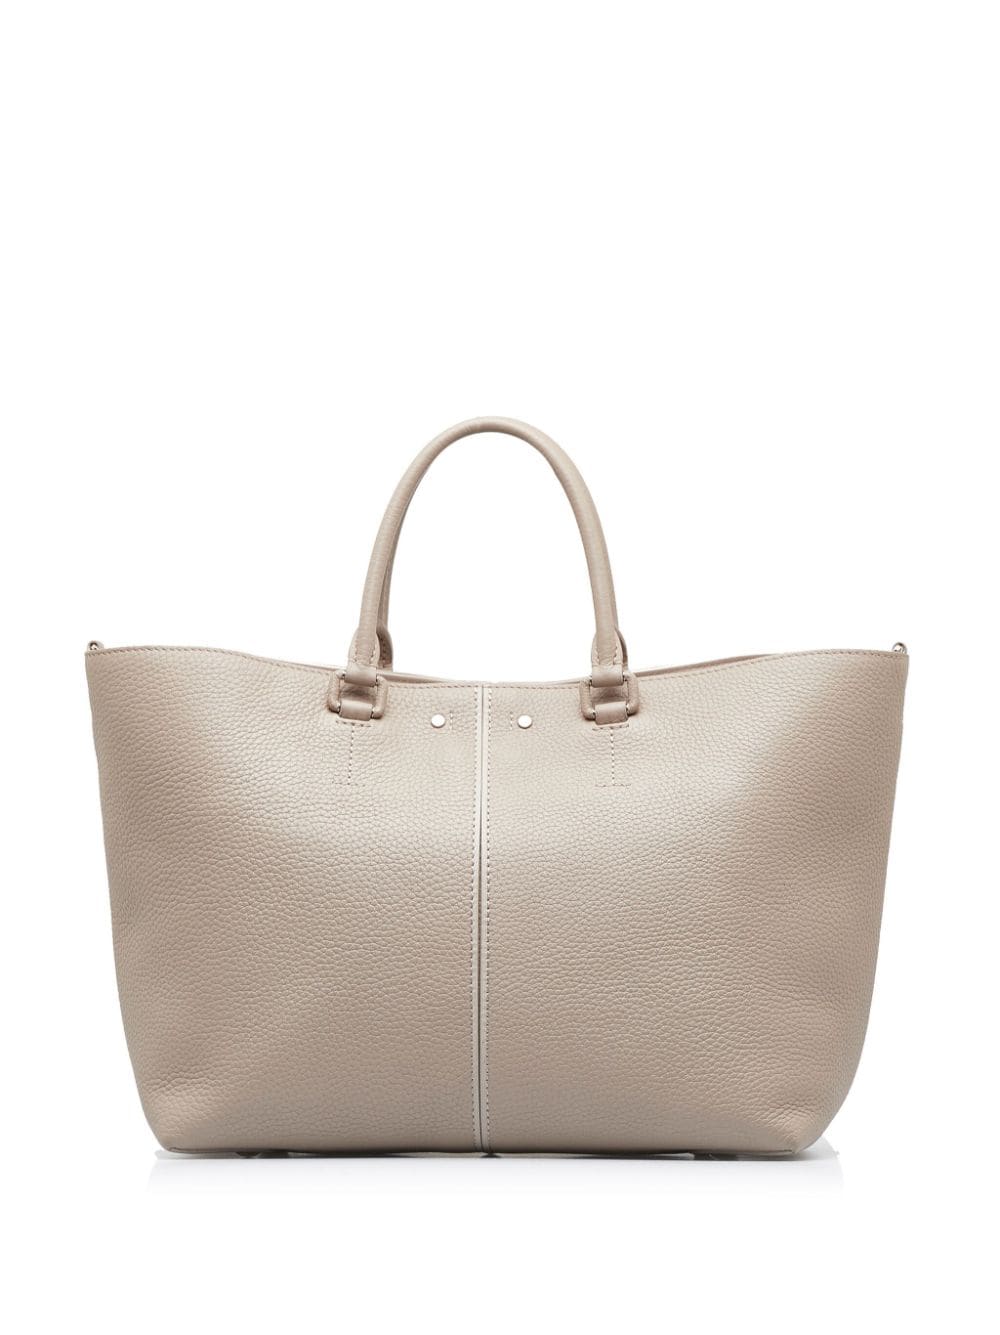 Louis Vuitton pre-owned Pernelle tote bag - Beige